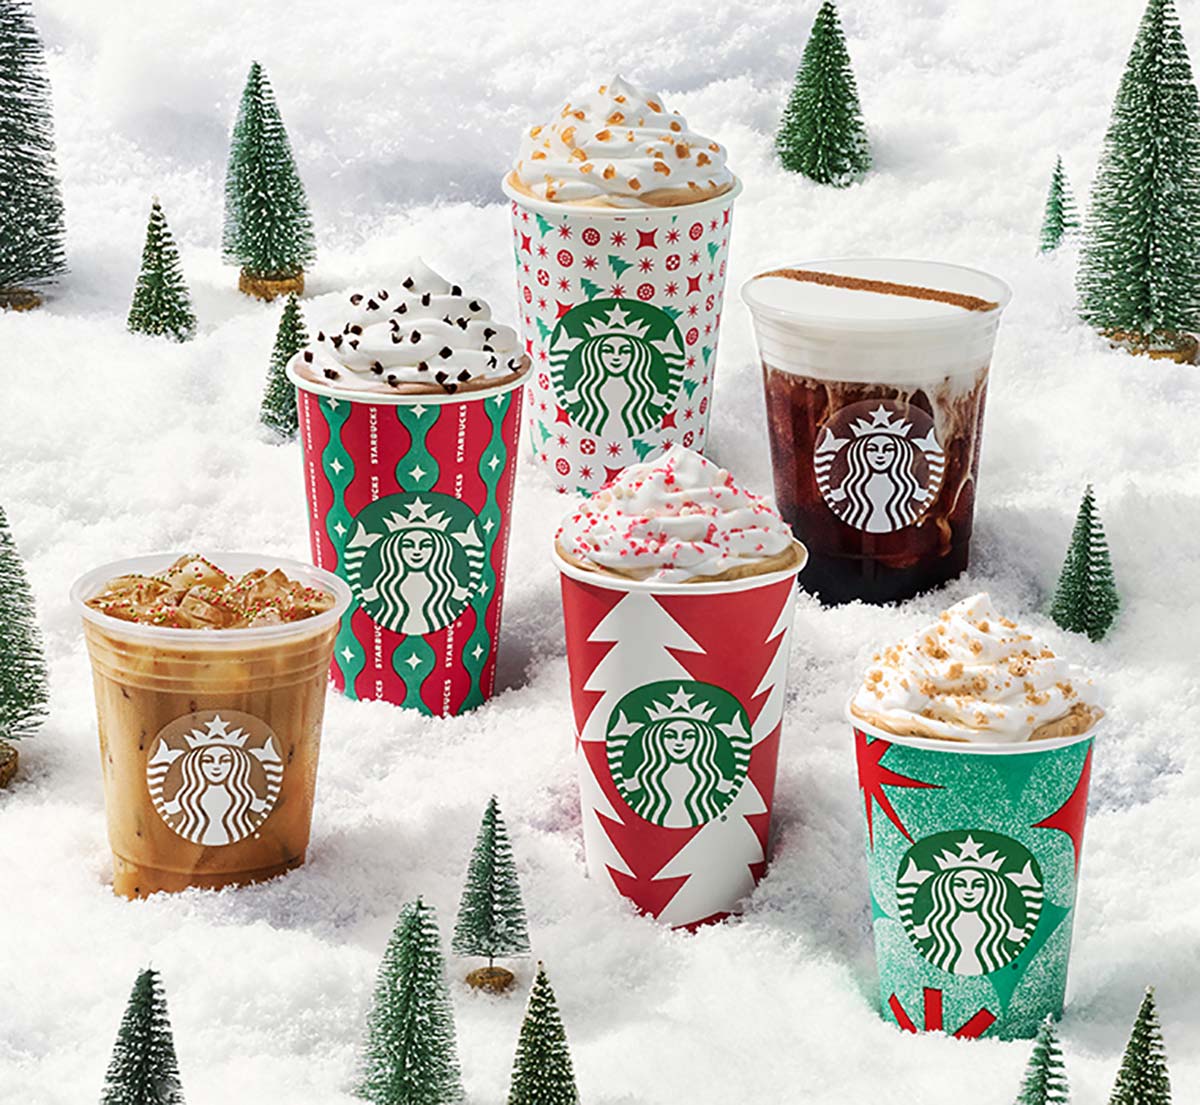 Starbucks holiday drinks on winter themed background.